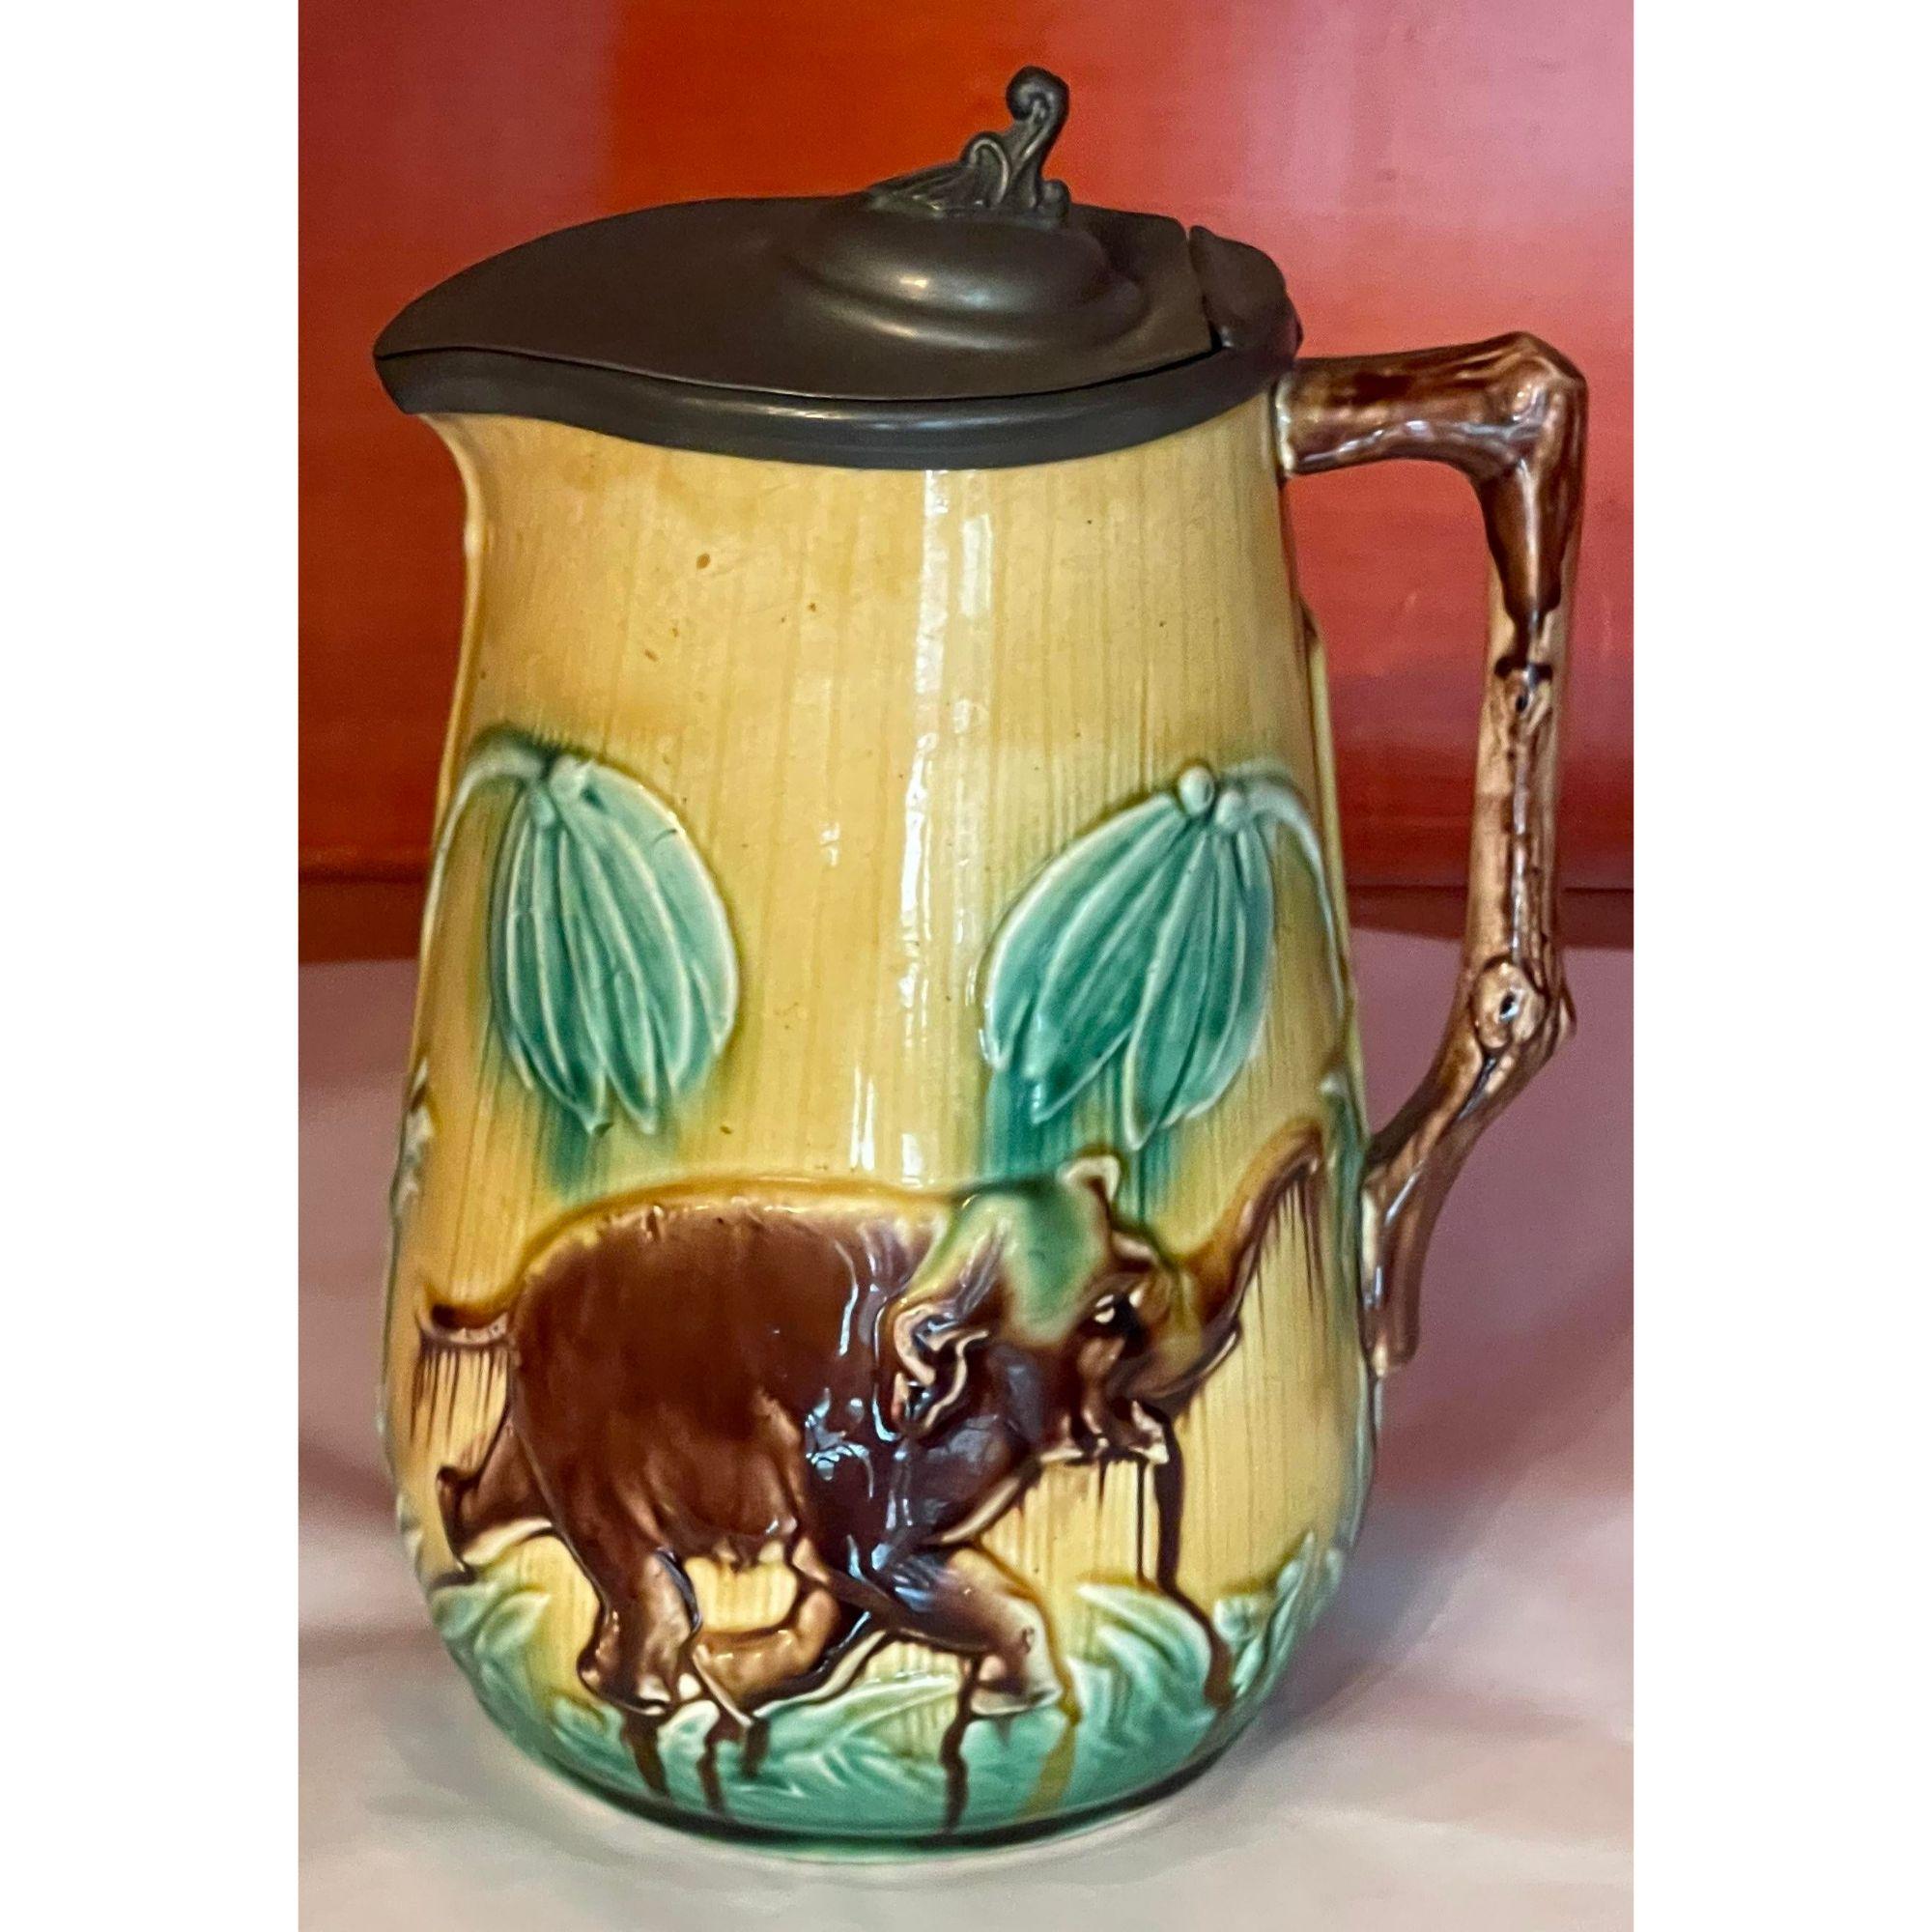 French Provincial Antique Majolica Pottery ElephantPewter Lidded Jug Pitcher, 19th Century For Sale